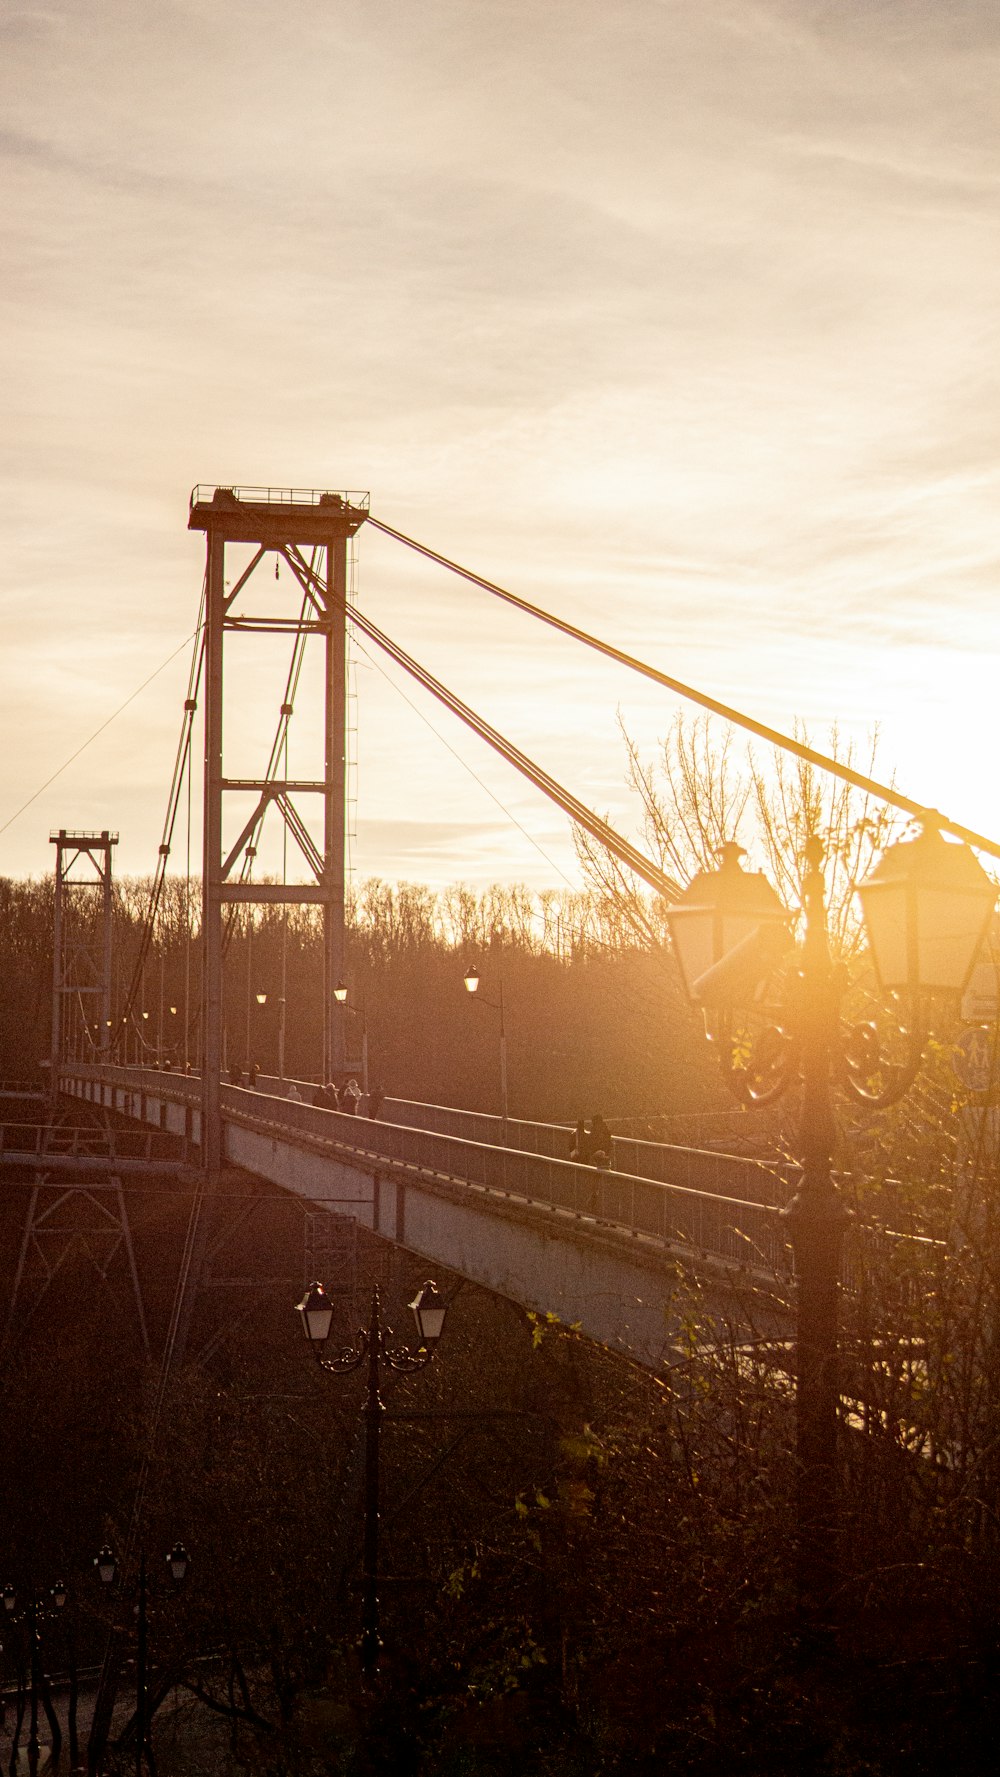 the sun is setting on a bridge over a river